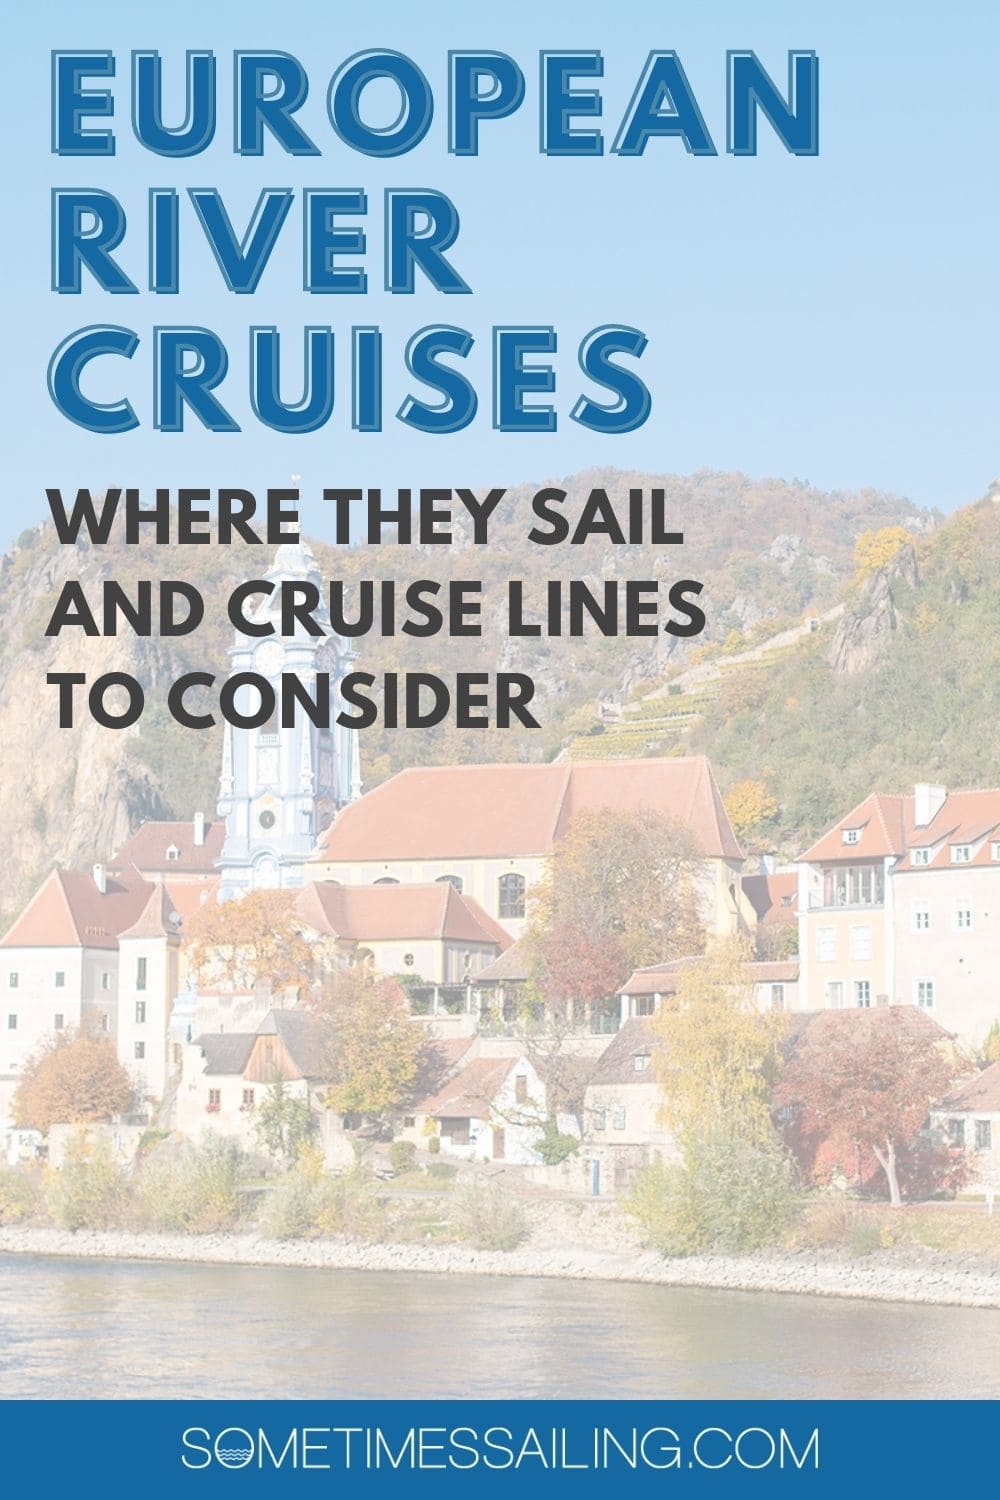 European River Cruises pinterest graphic - where they sail and cruise lines to consider.